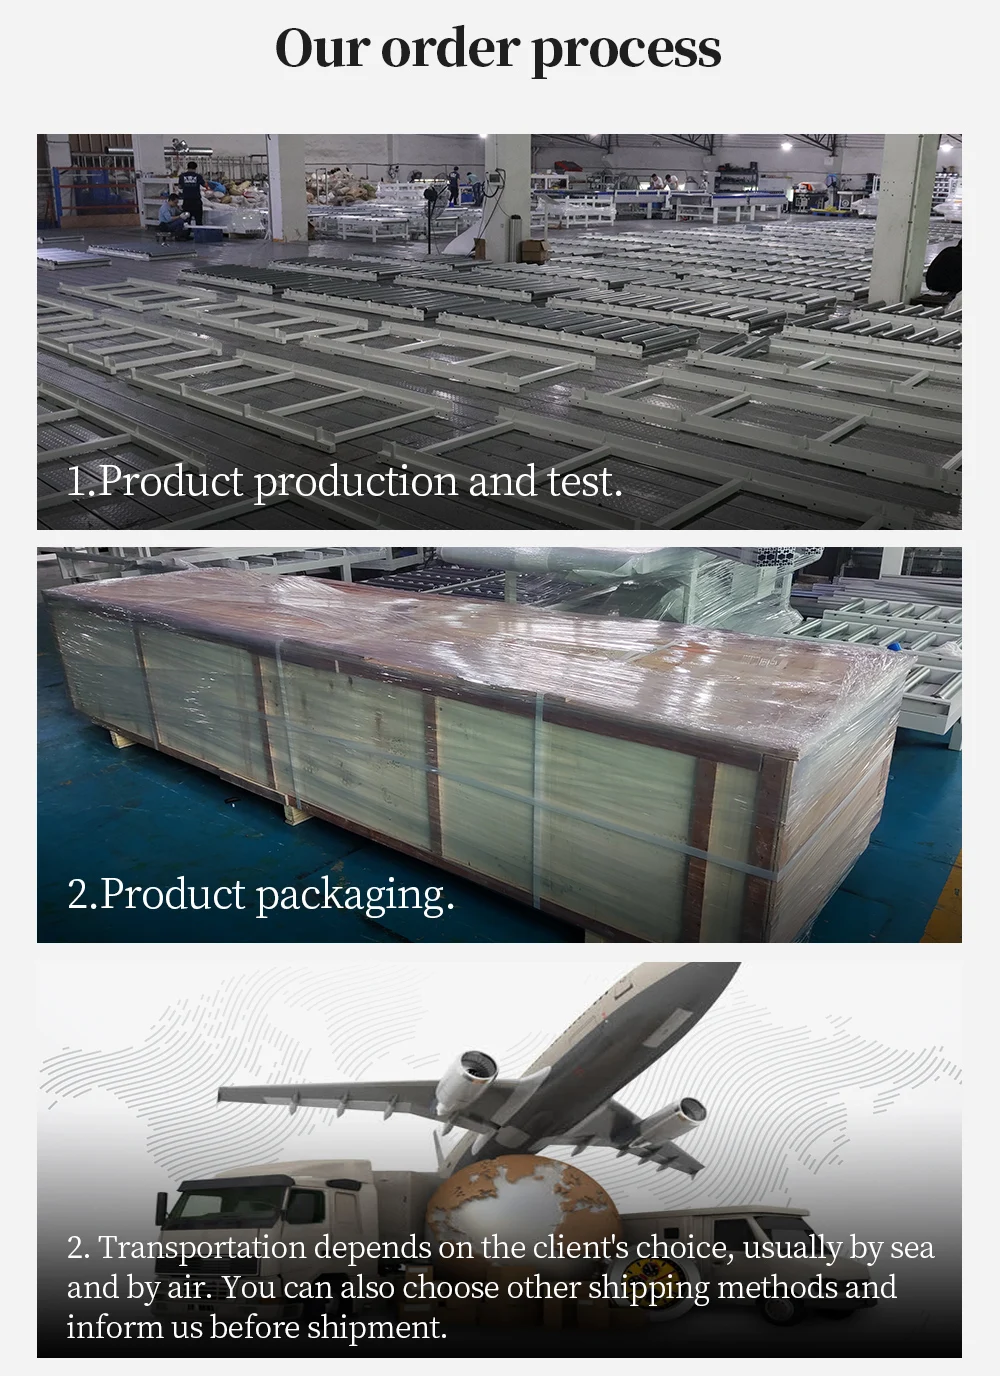 Professional customized intelligent RGV transport aircraft can improve operational efficiency manufacture